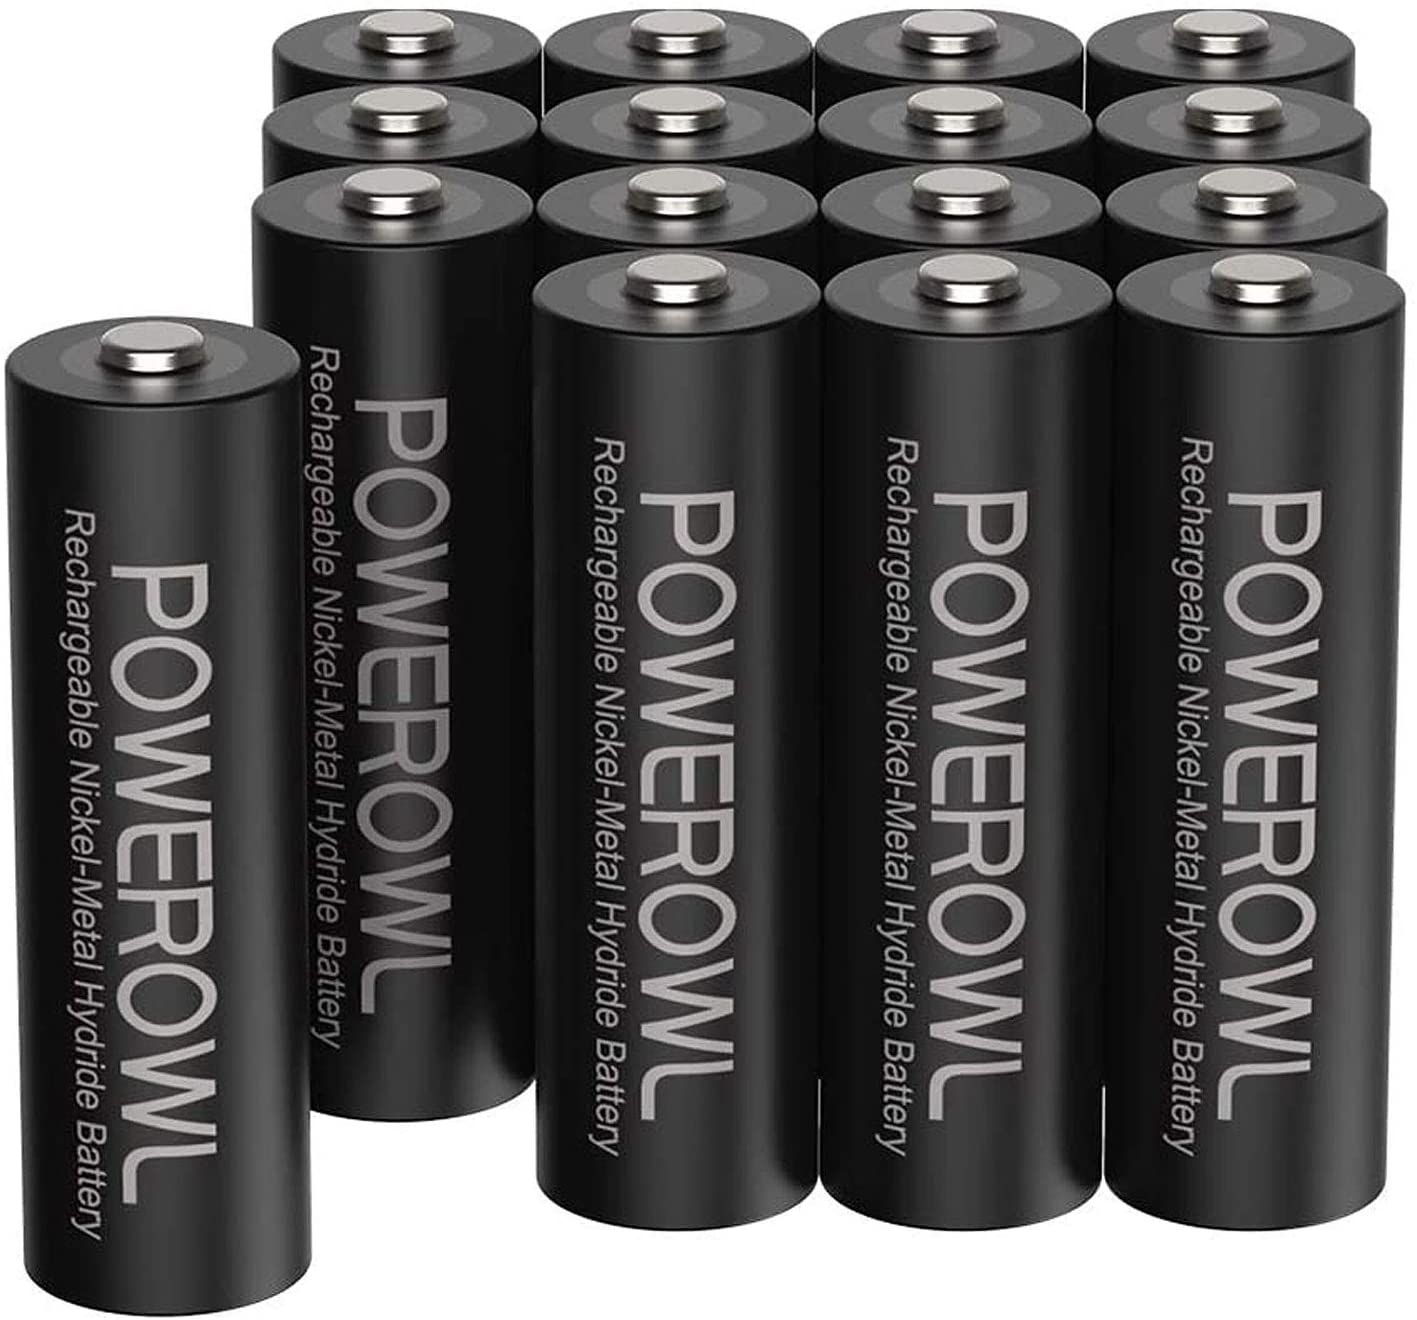 POWEROWL AA Rechargeable Batteries a